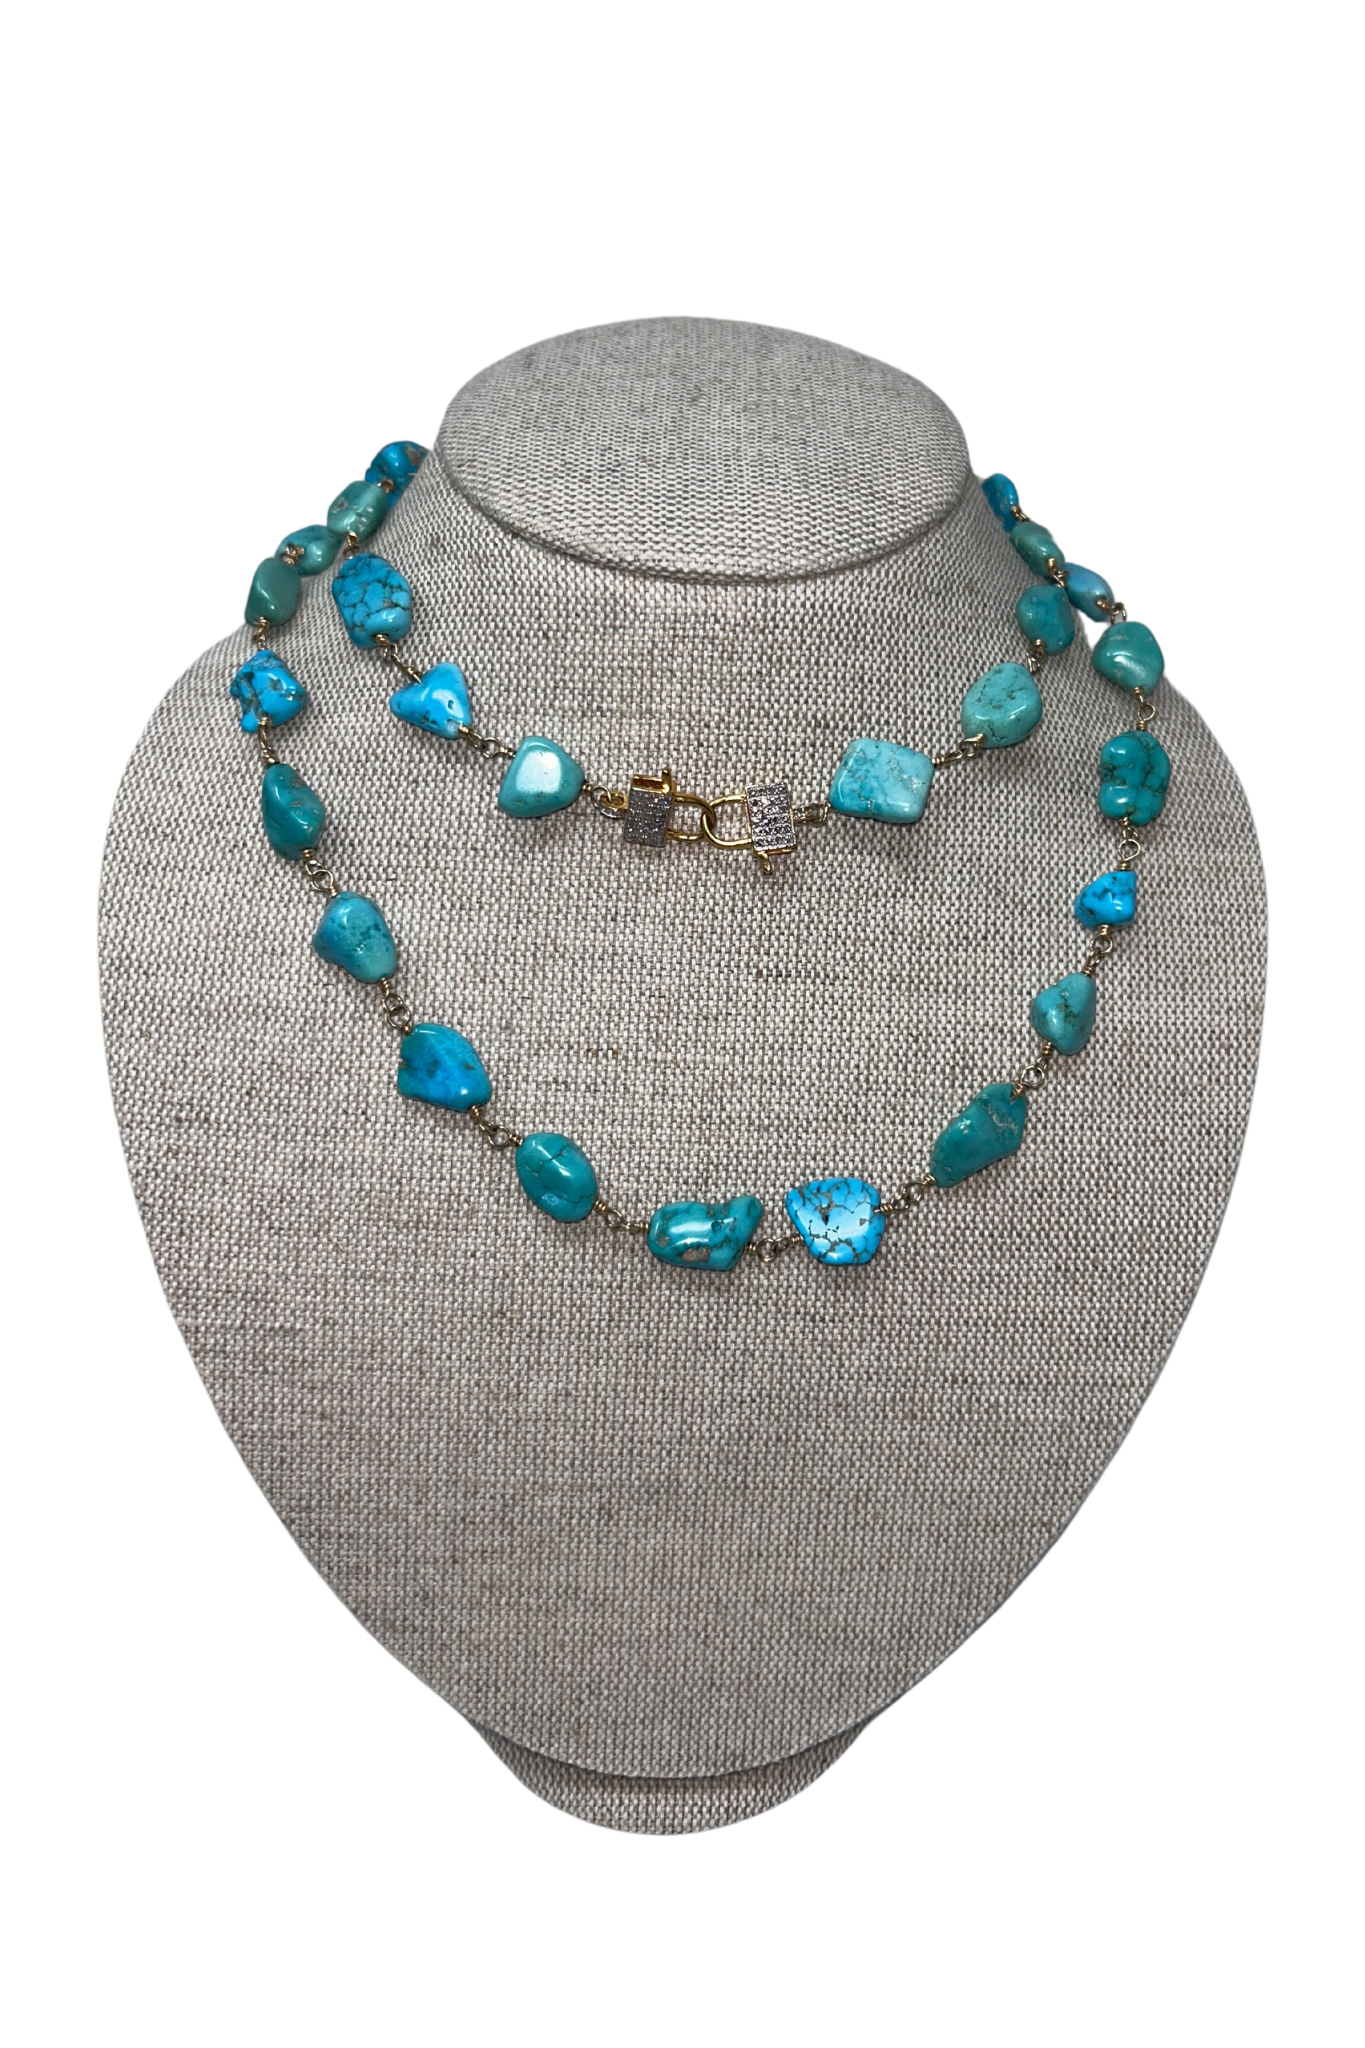 V13 The Woods Long Sleeping Beauty Turquoise Necklace